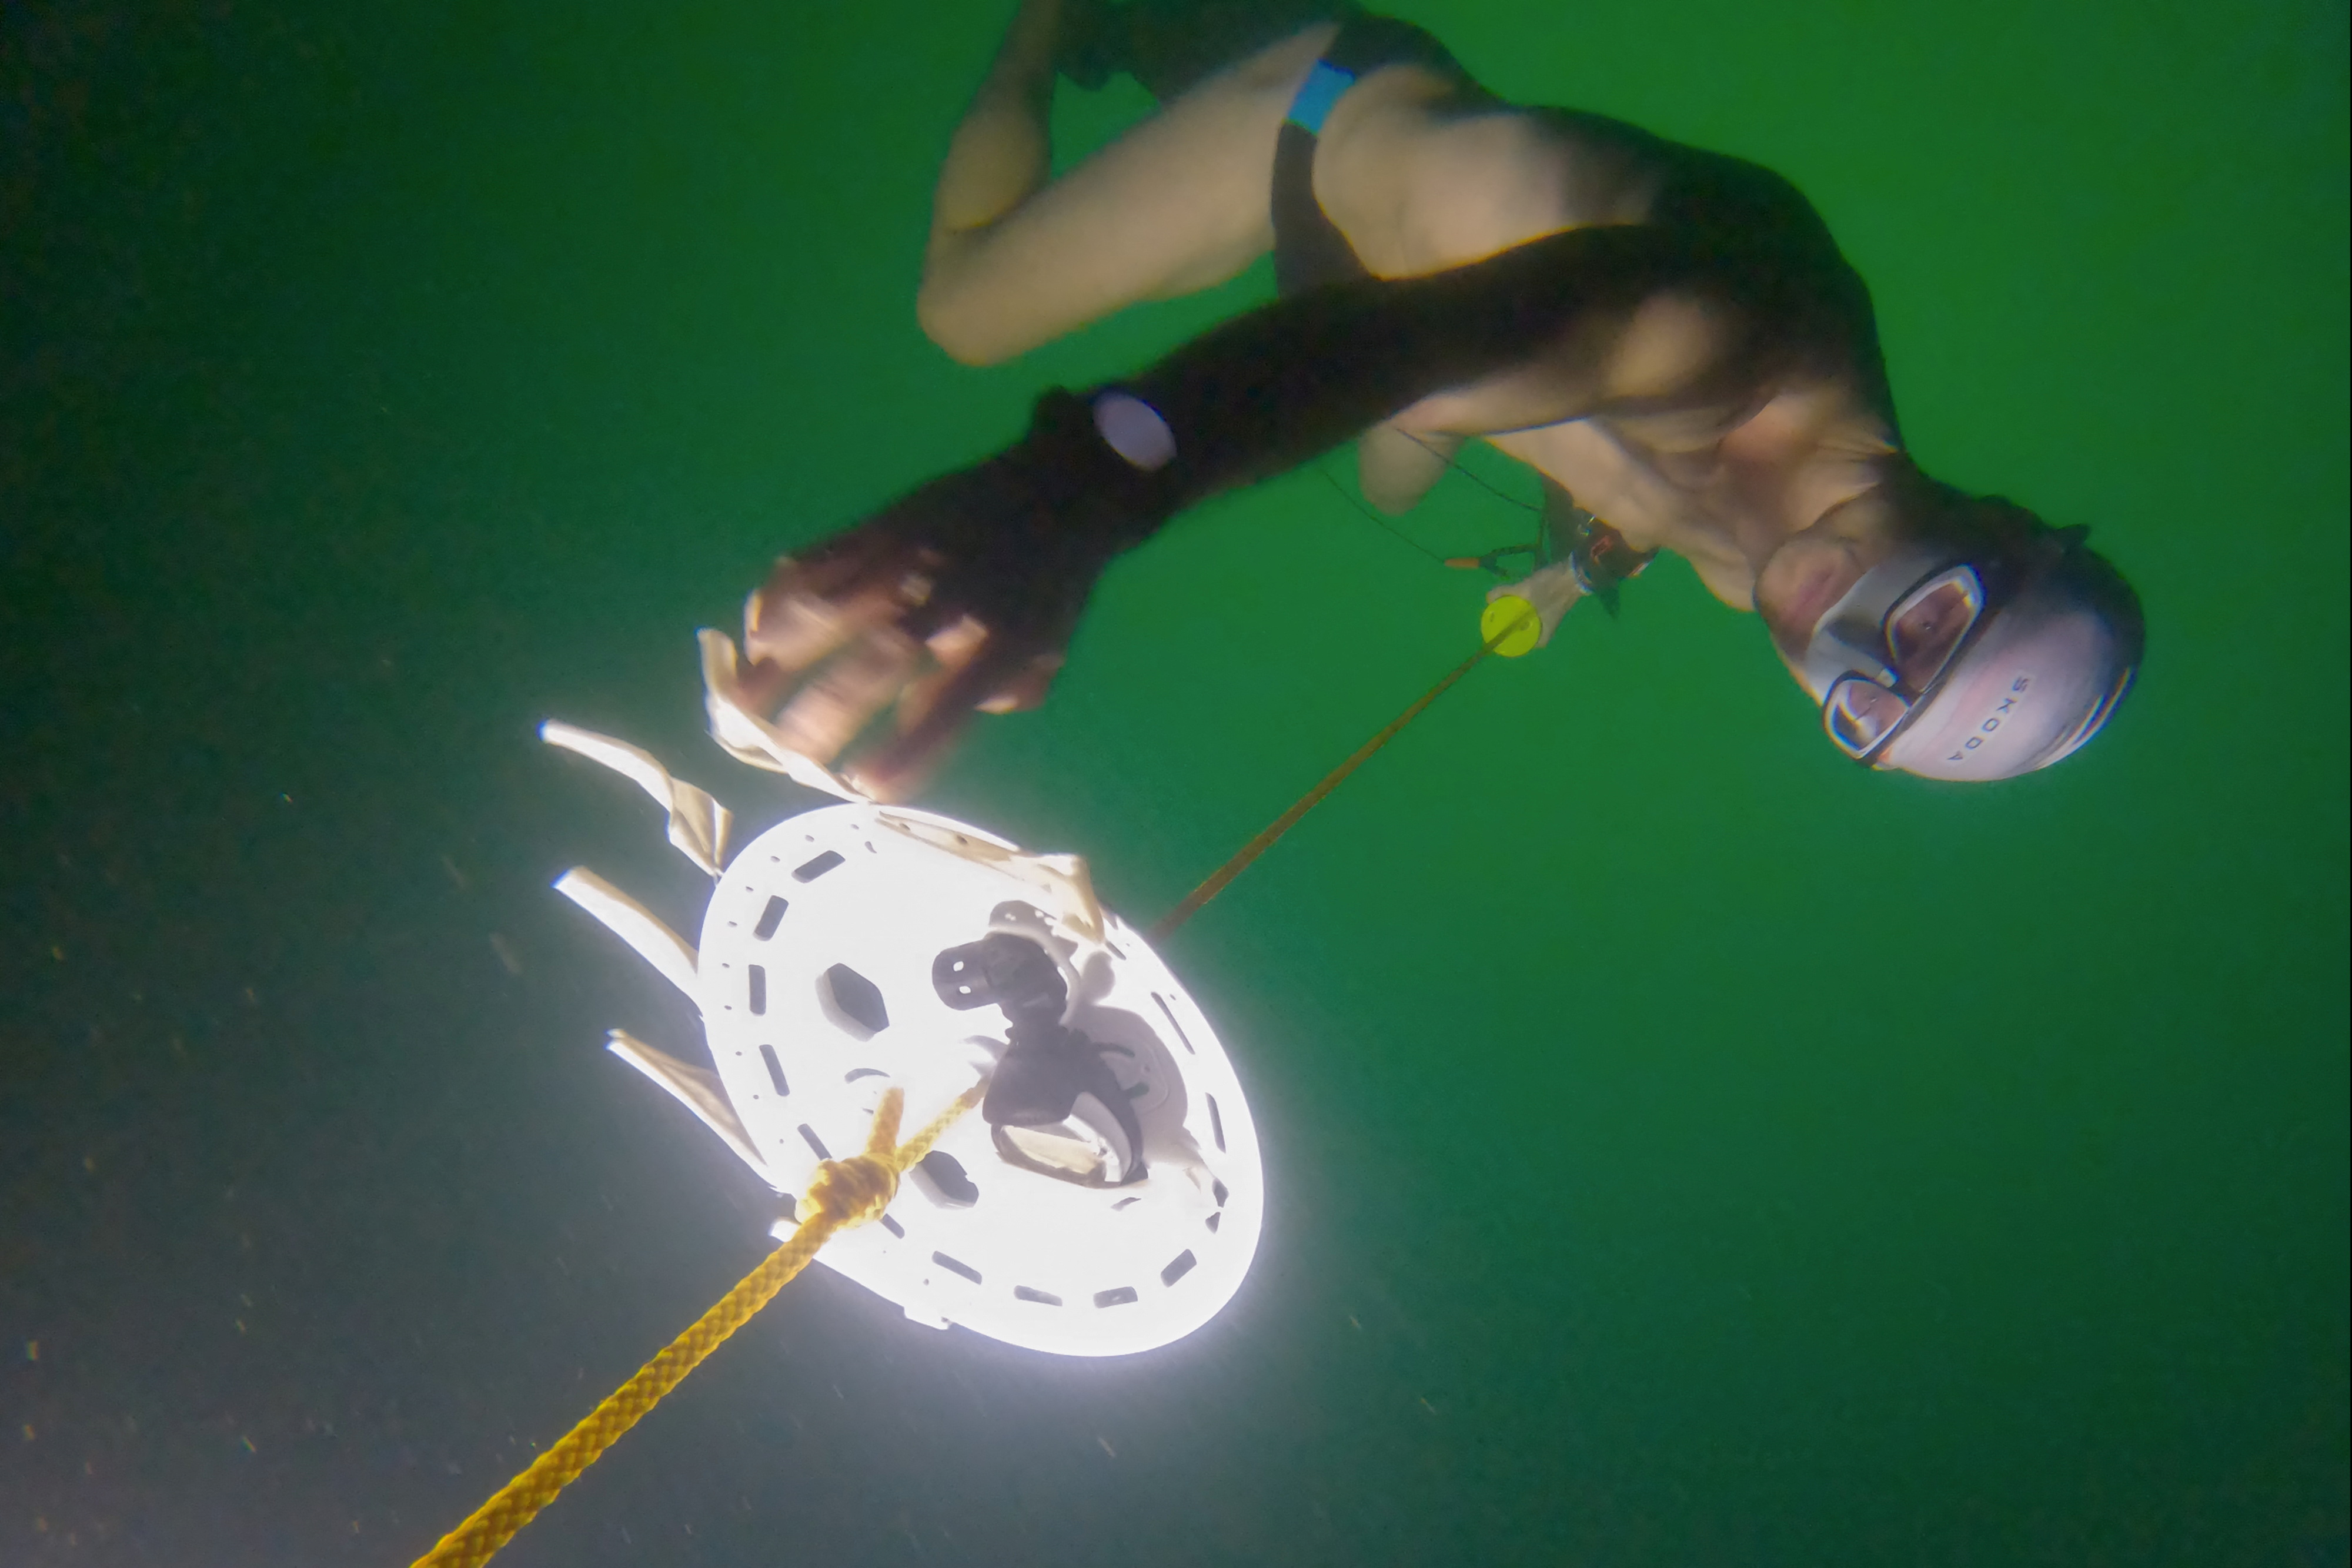 Czech freediver Vencl reaches 52 metres under the ice in Sils